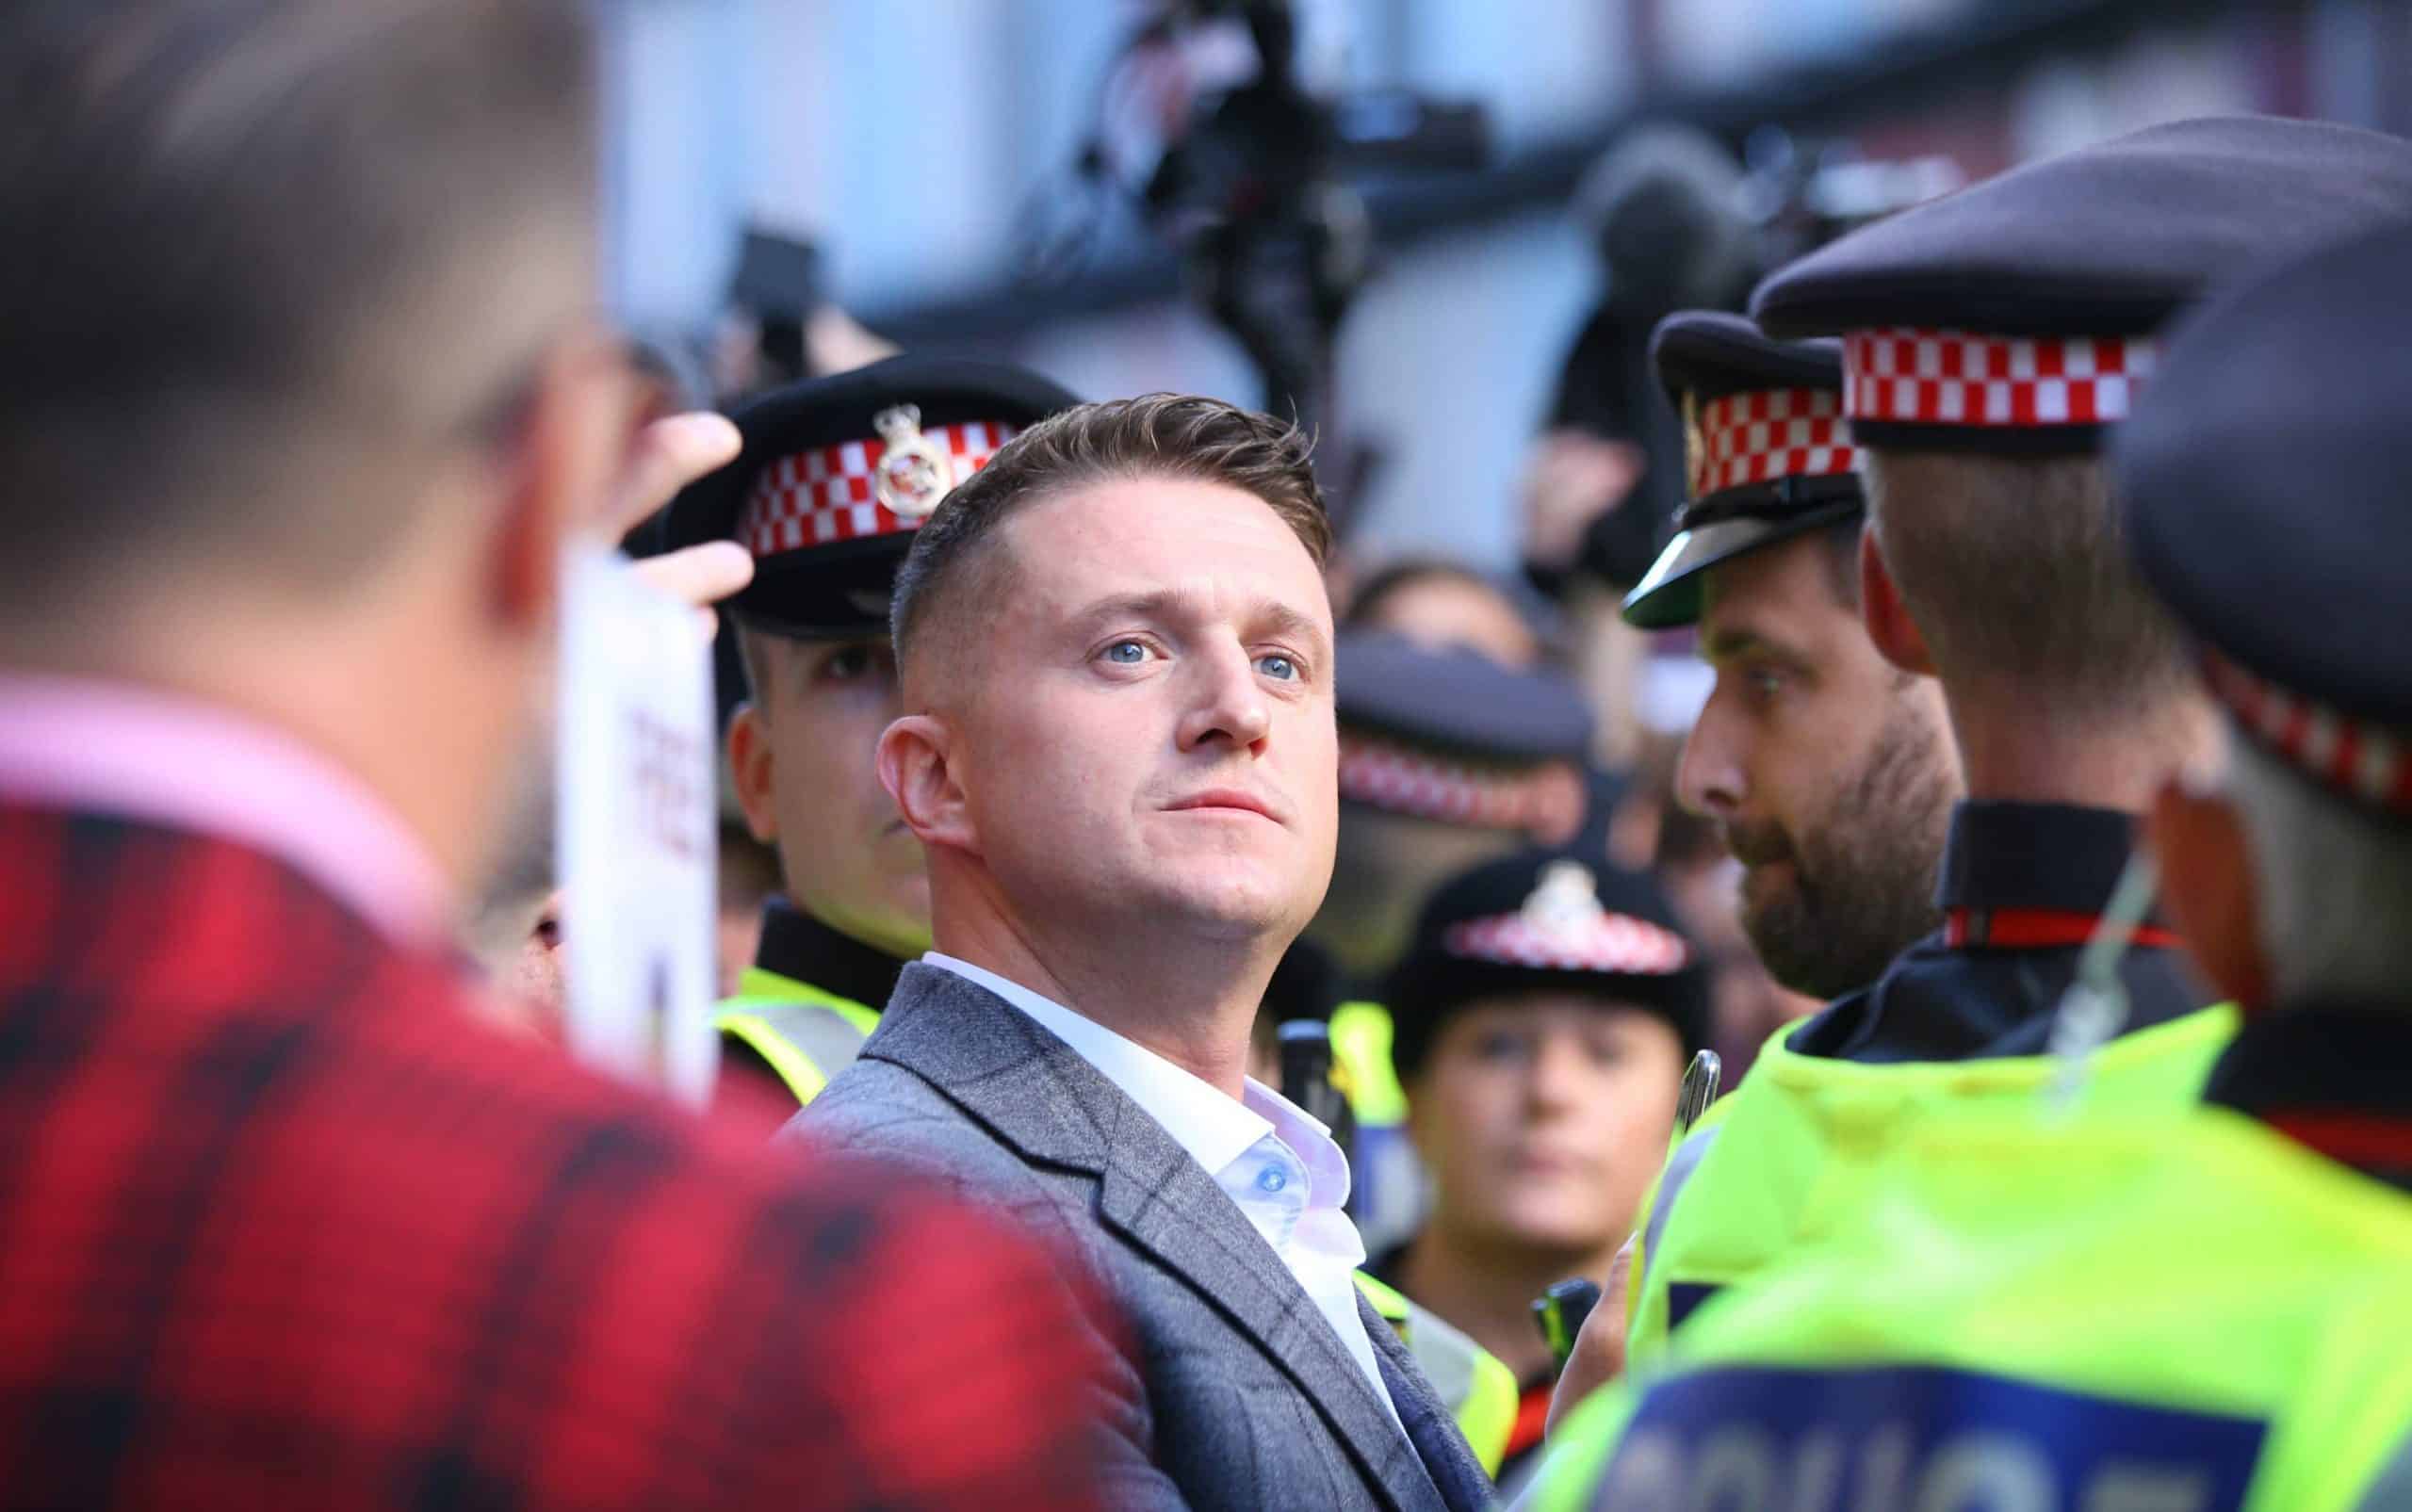 Tommy Robinson spent donations from far-right supporters on ‘coke and nights out’, ex-allies claim